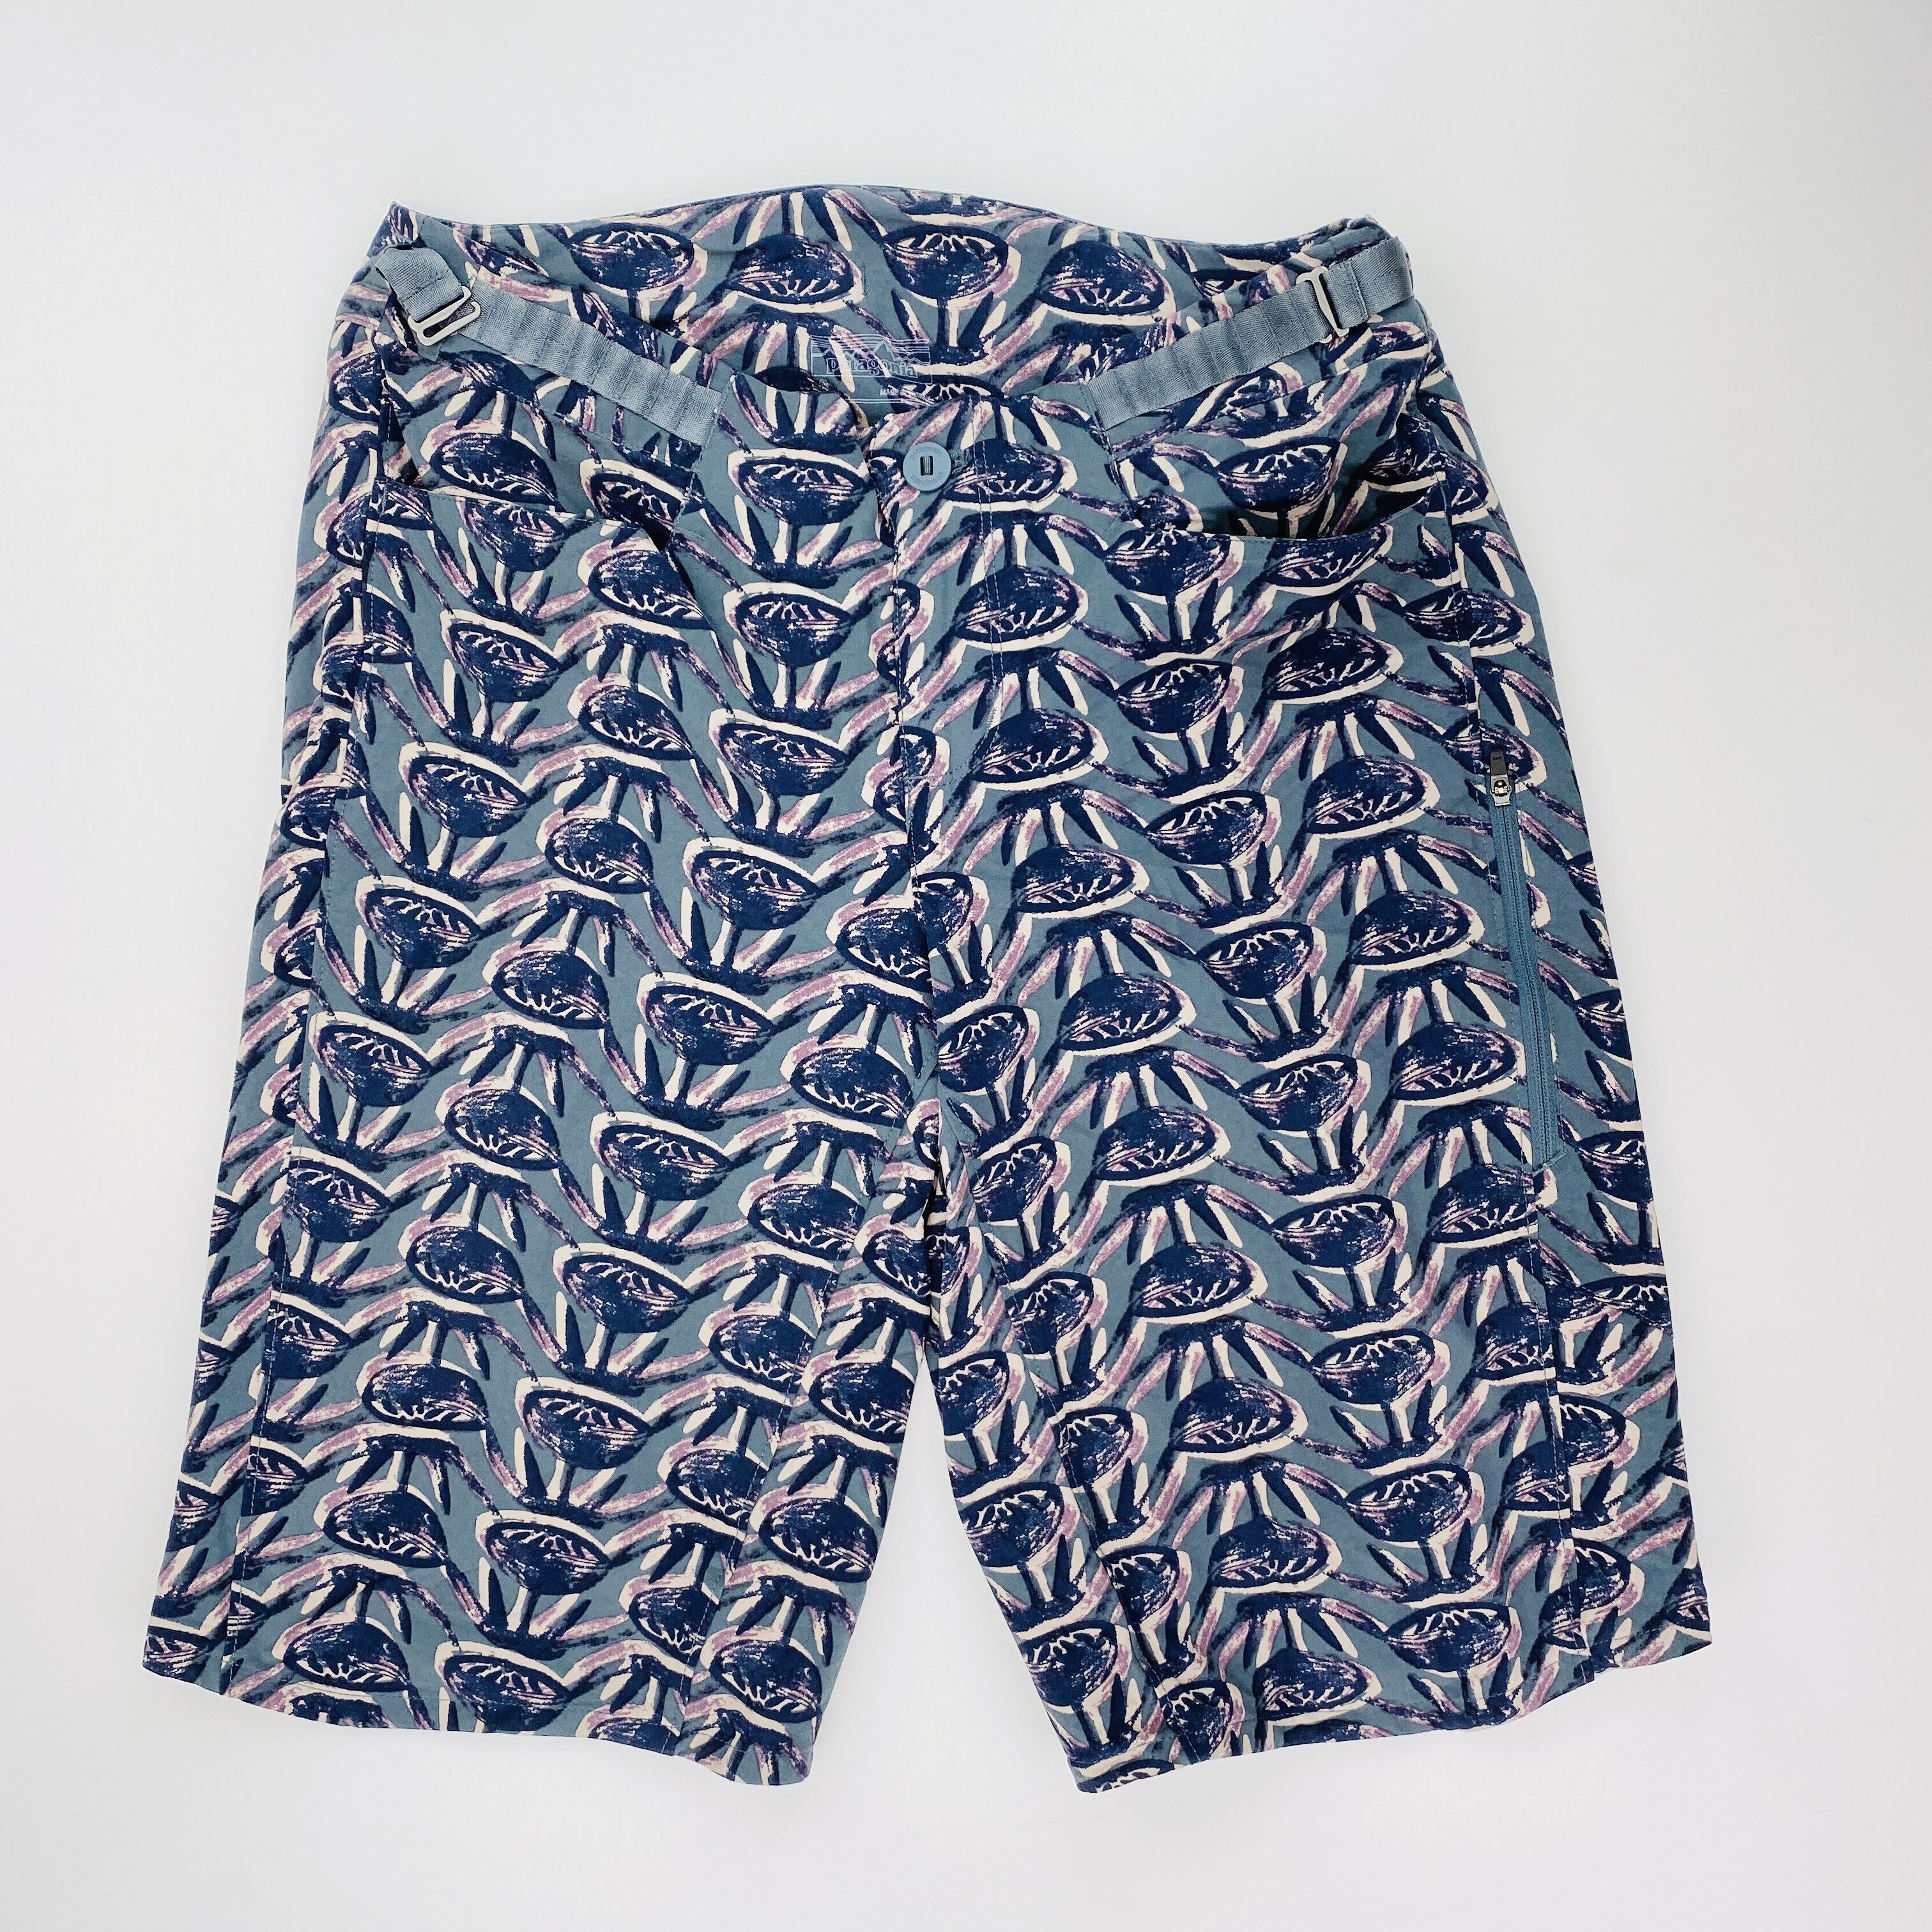 Patagonia W's Dirt Craft Bike Shorts - Second Hand Shorts - Women's - Multicolored - 36 | Hardloop